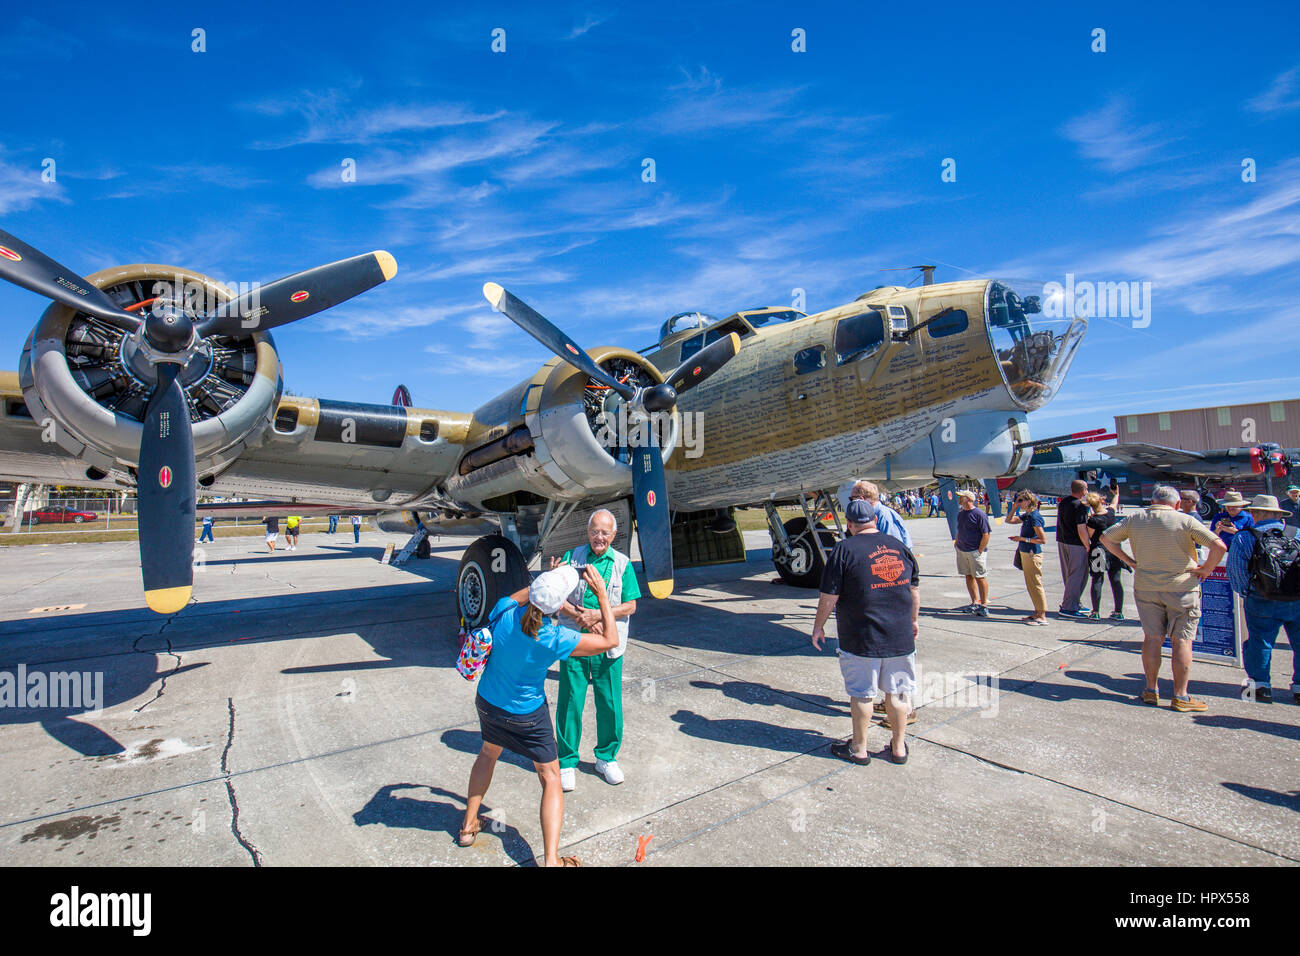 B-17 Flying Fortress bomber at Wings of FreedomTour of historic vintage WWII war planes at Venice Airport in Venice Florida Stock Photo